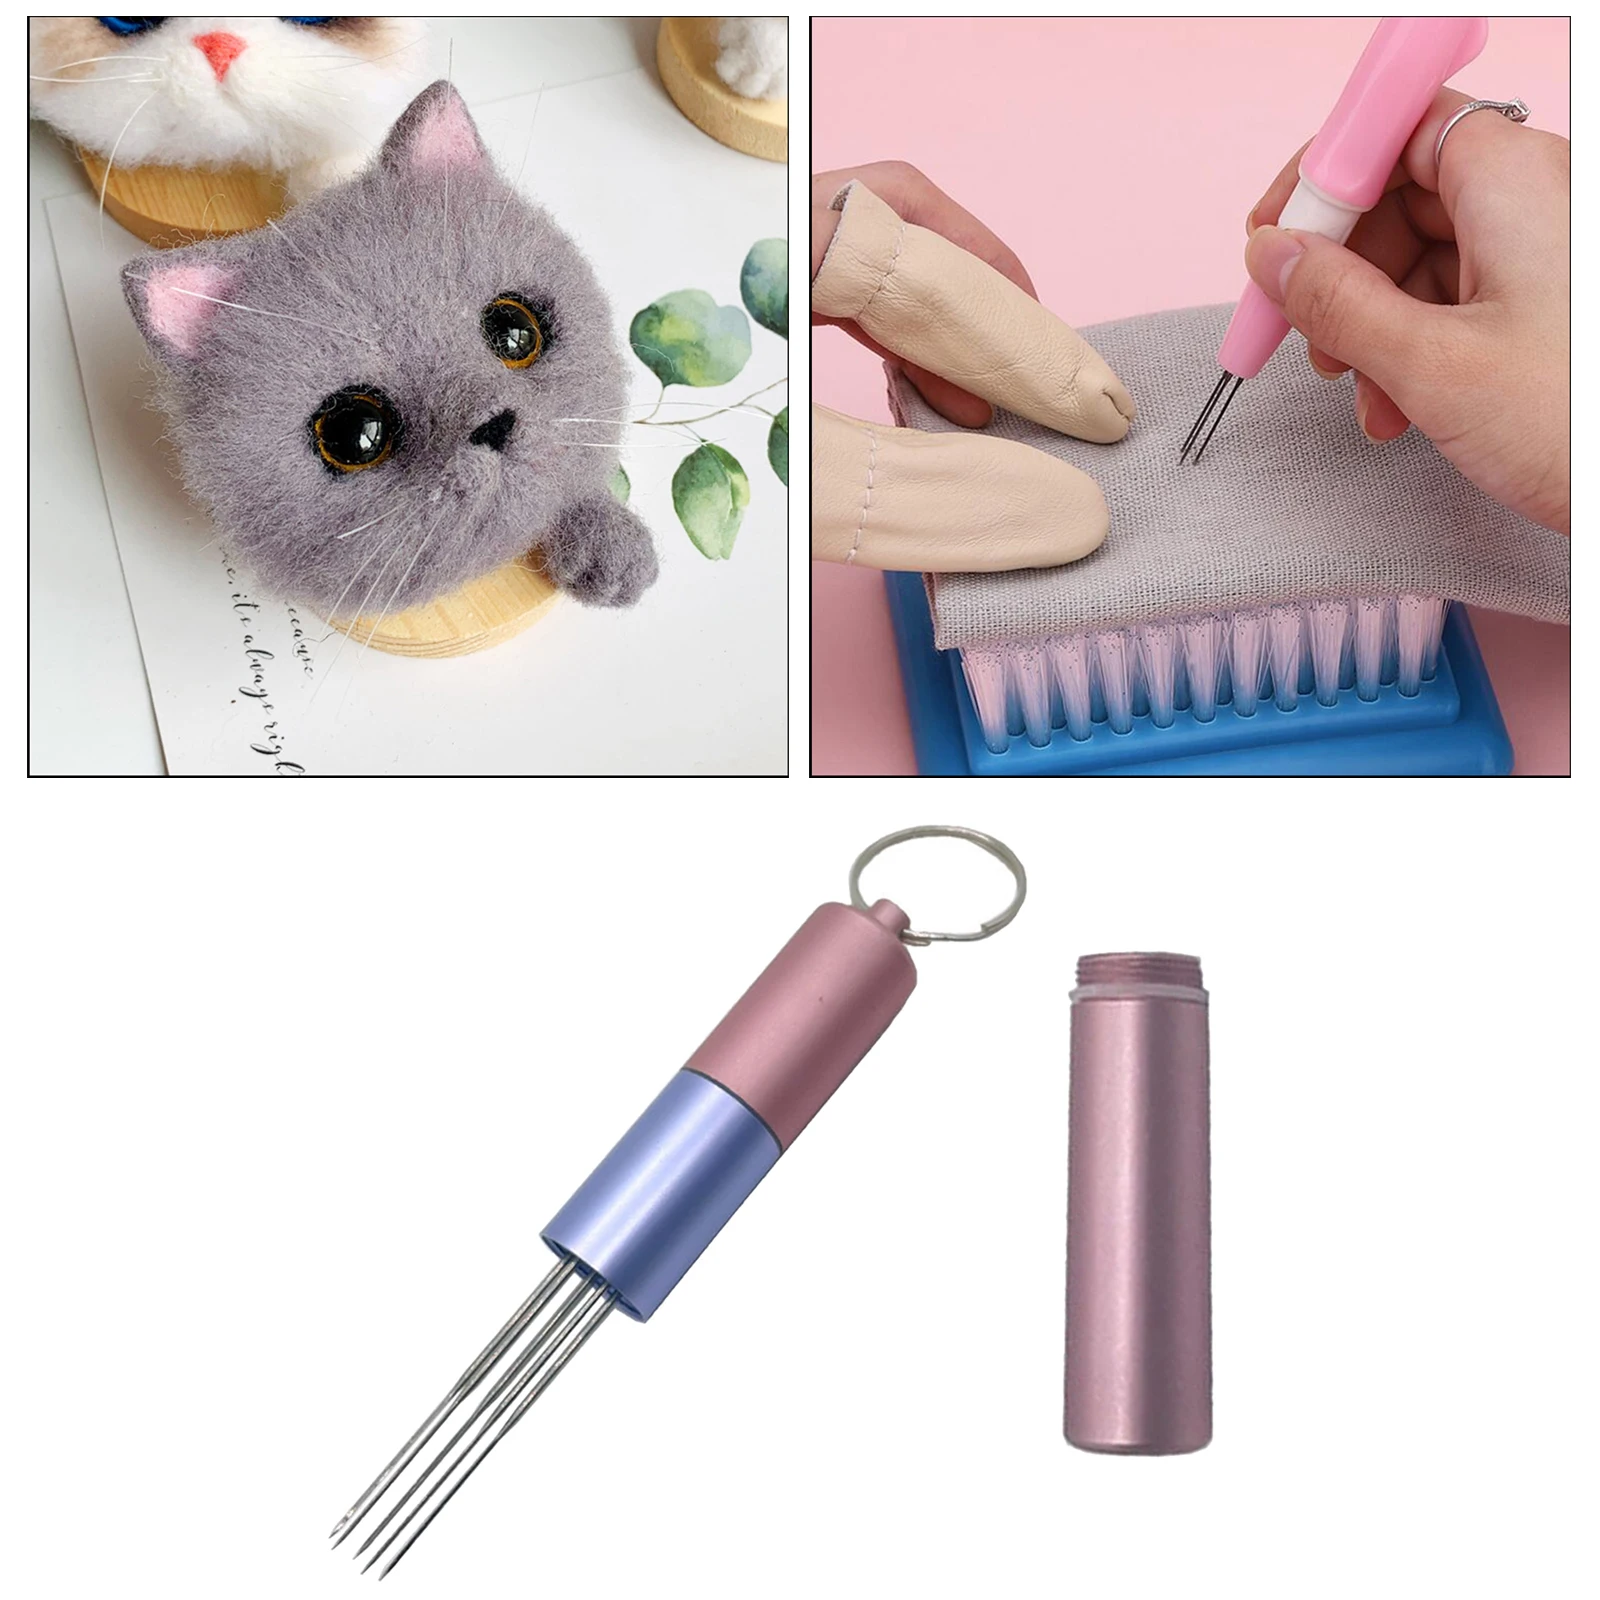 Embroidery Punch NeedleFelting Needle Embroidery Punch Pen with 6 Fine Needles Set Tools Wool Felting Supplies DIY Crafting